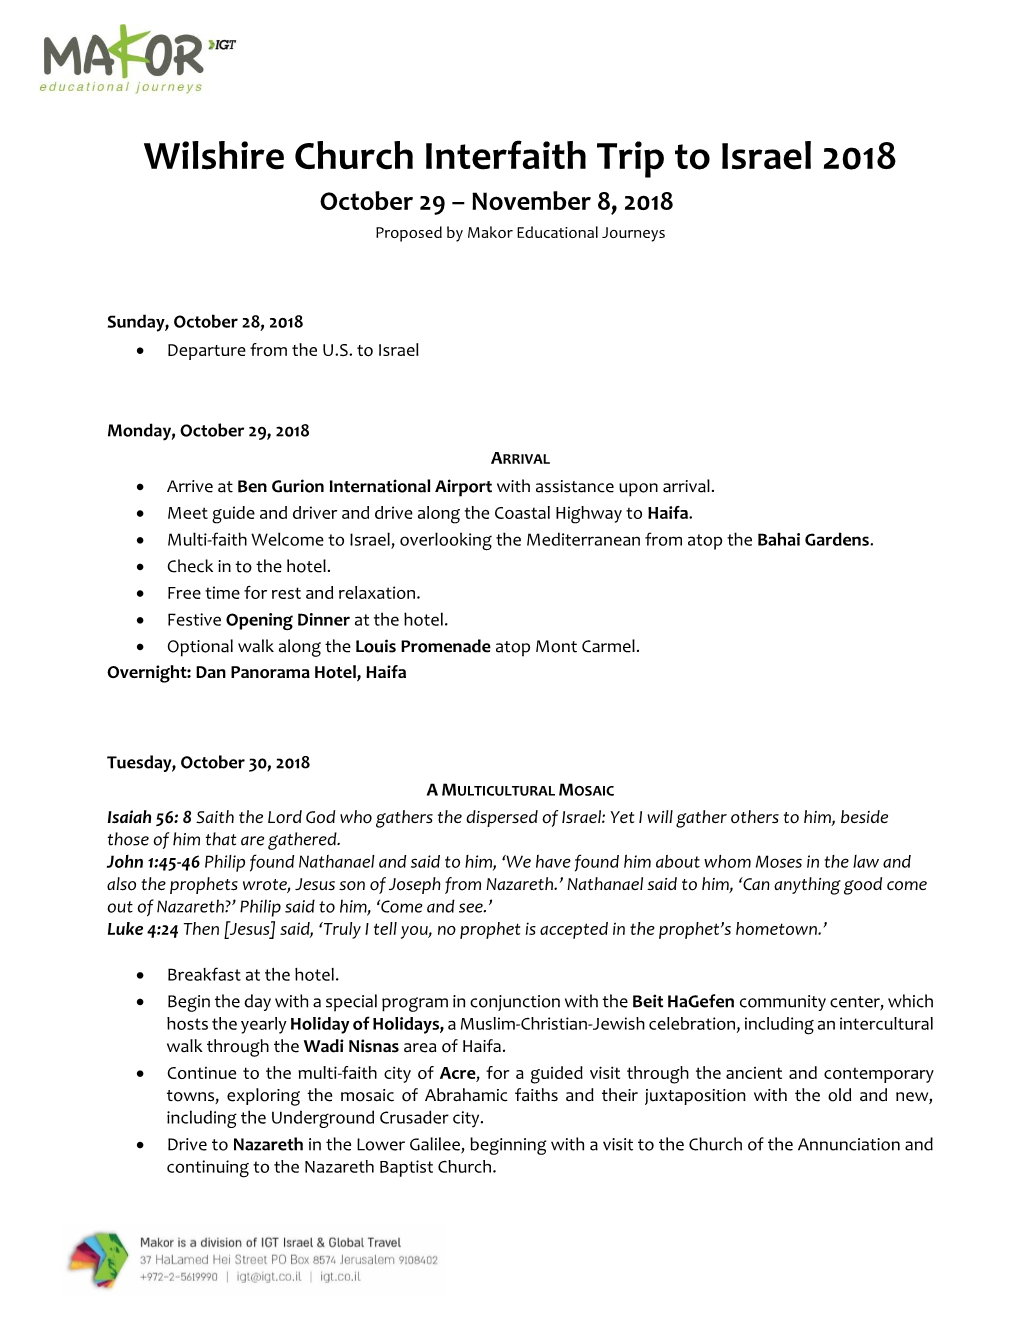 Wilshire Church Interfaith Trip to Israel 2018 October 29 – November 8, 2018 Proposed by Makor Educational Journeys